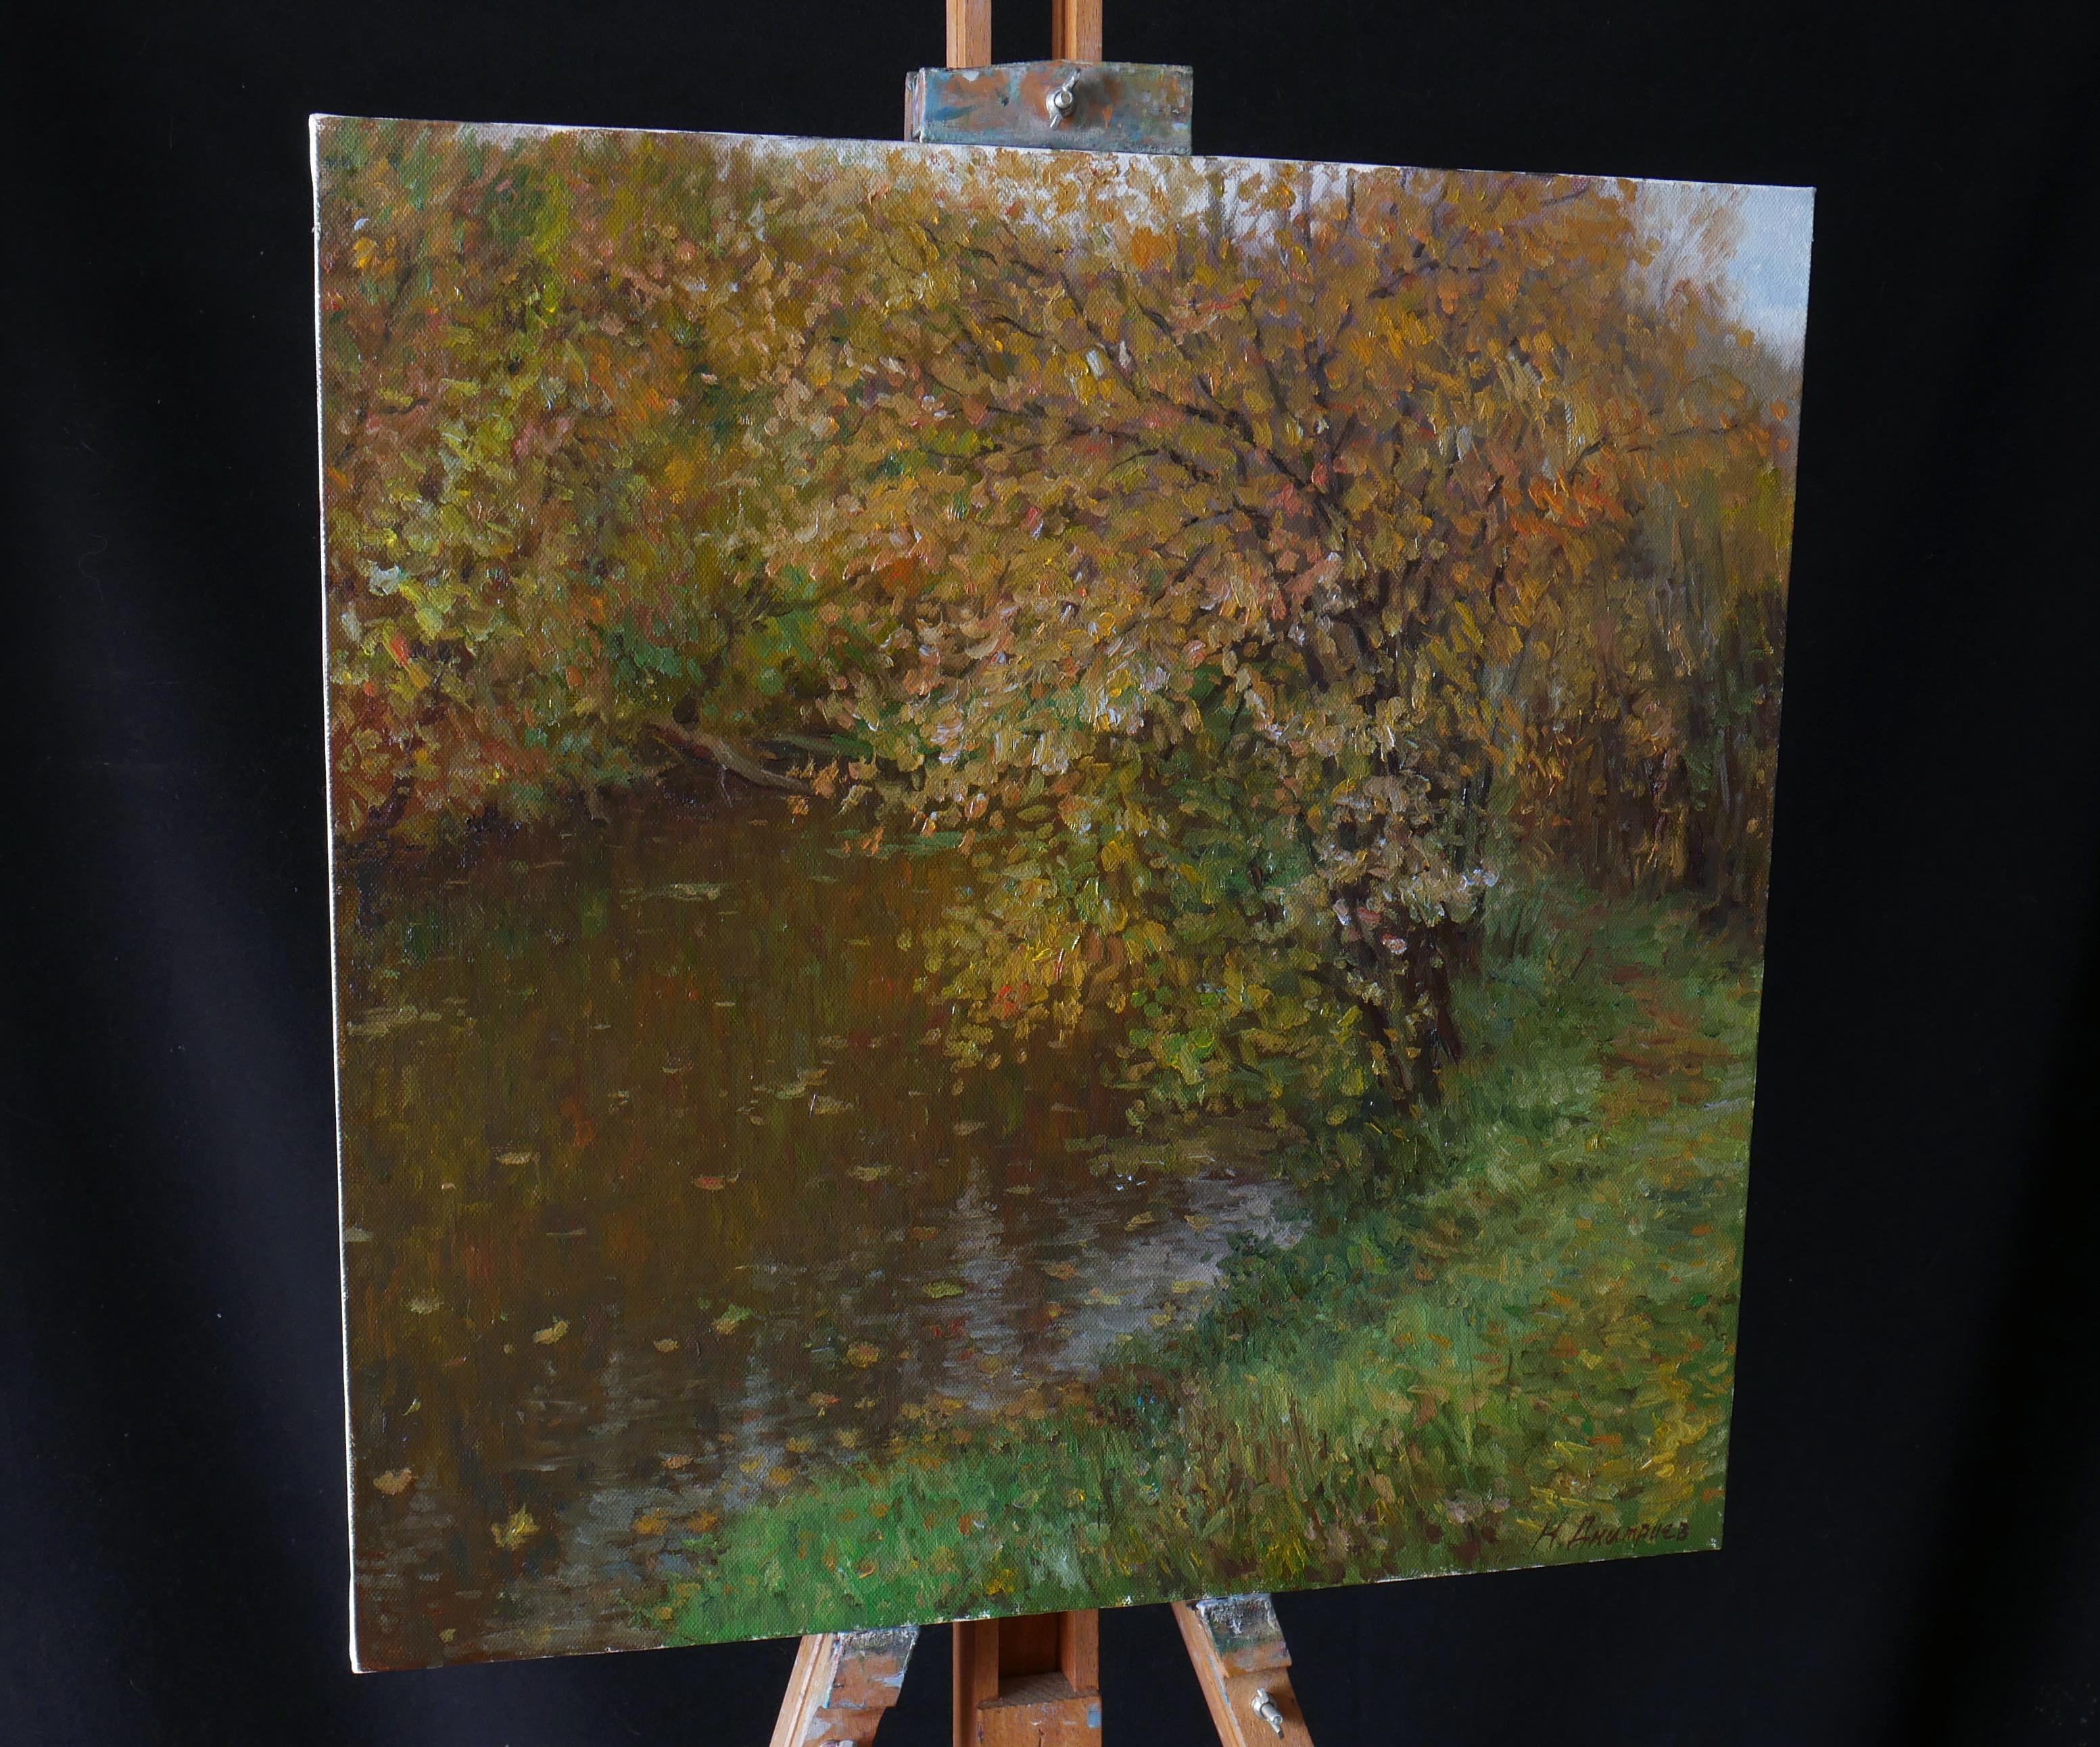 Silence Of Autumn - river autumn landscape painting - Impressionist Painting by Nikolay Dmitriev